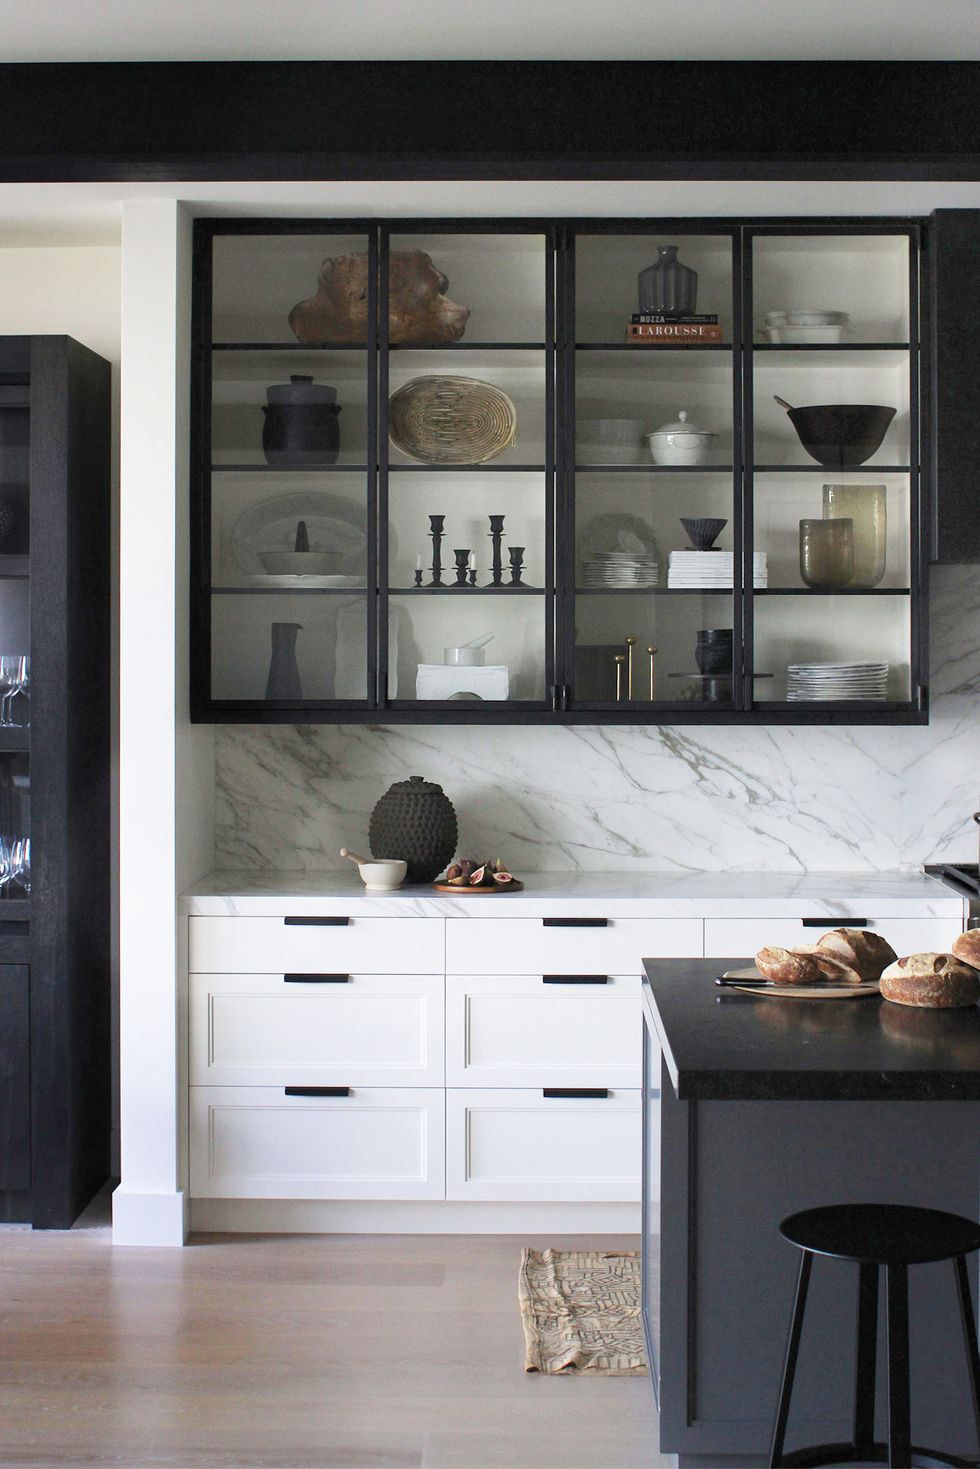 Kitchen Cabinet Trends For 2023, According To Designers